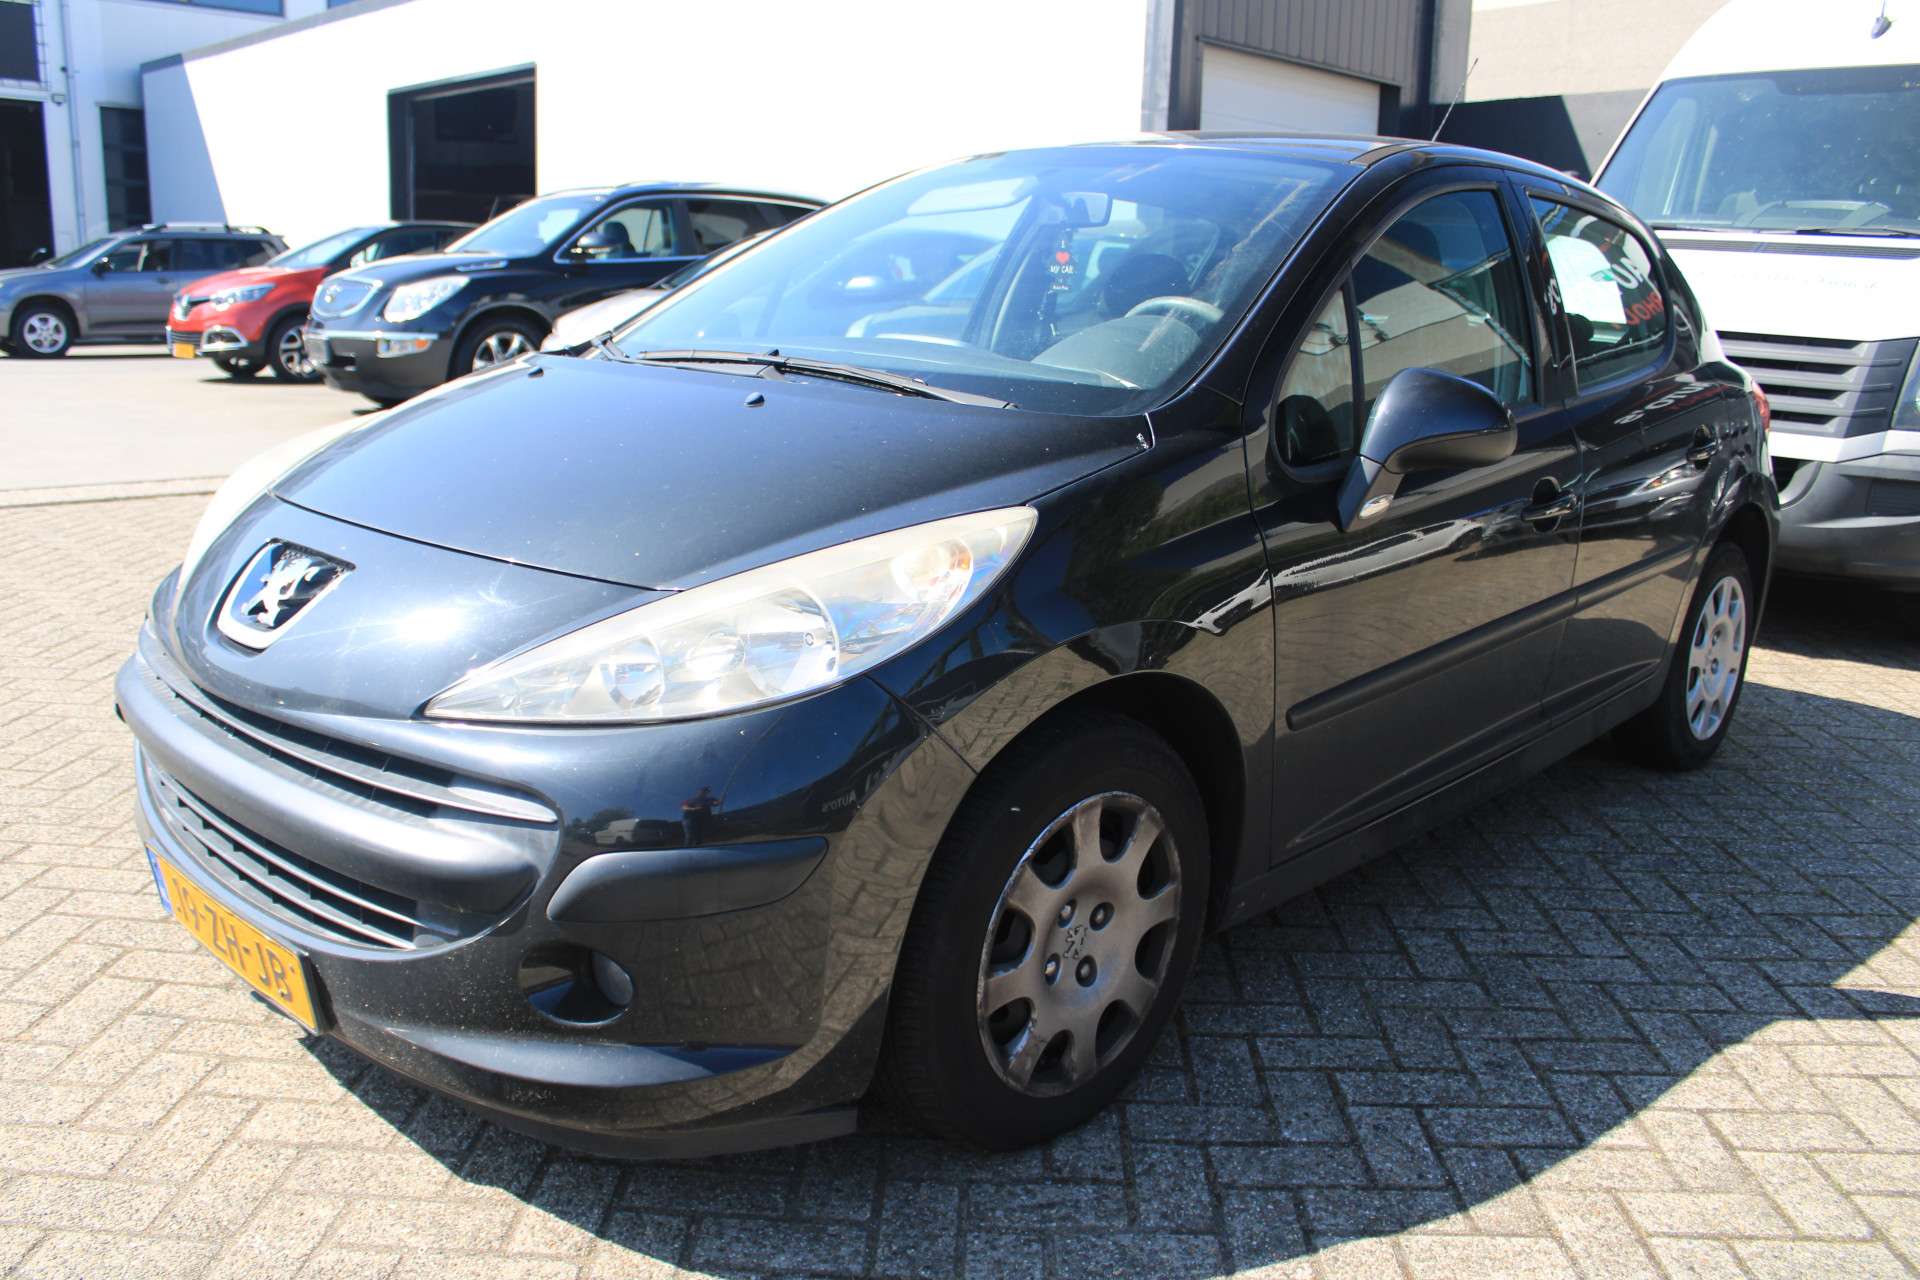 Peugeot 207 Compact in Black used in OOSTERHOUT for € 1,350.-